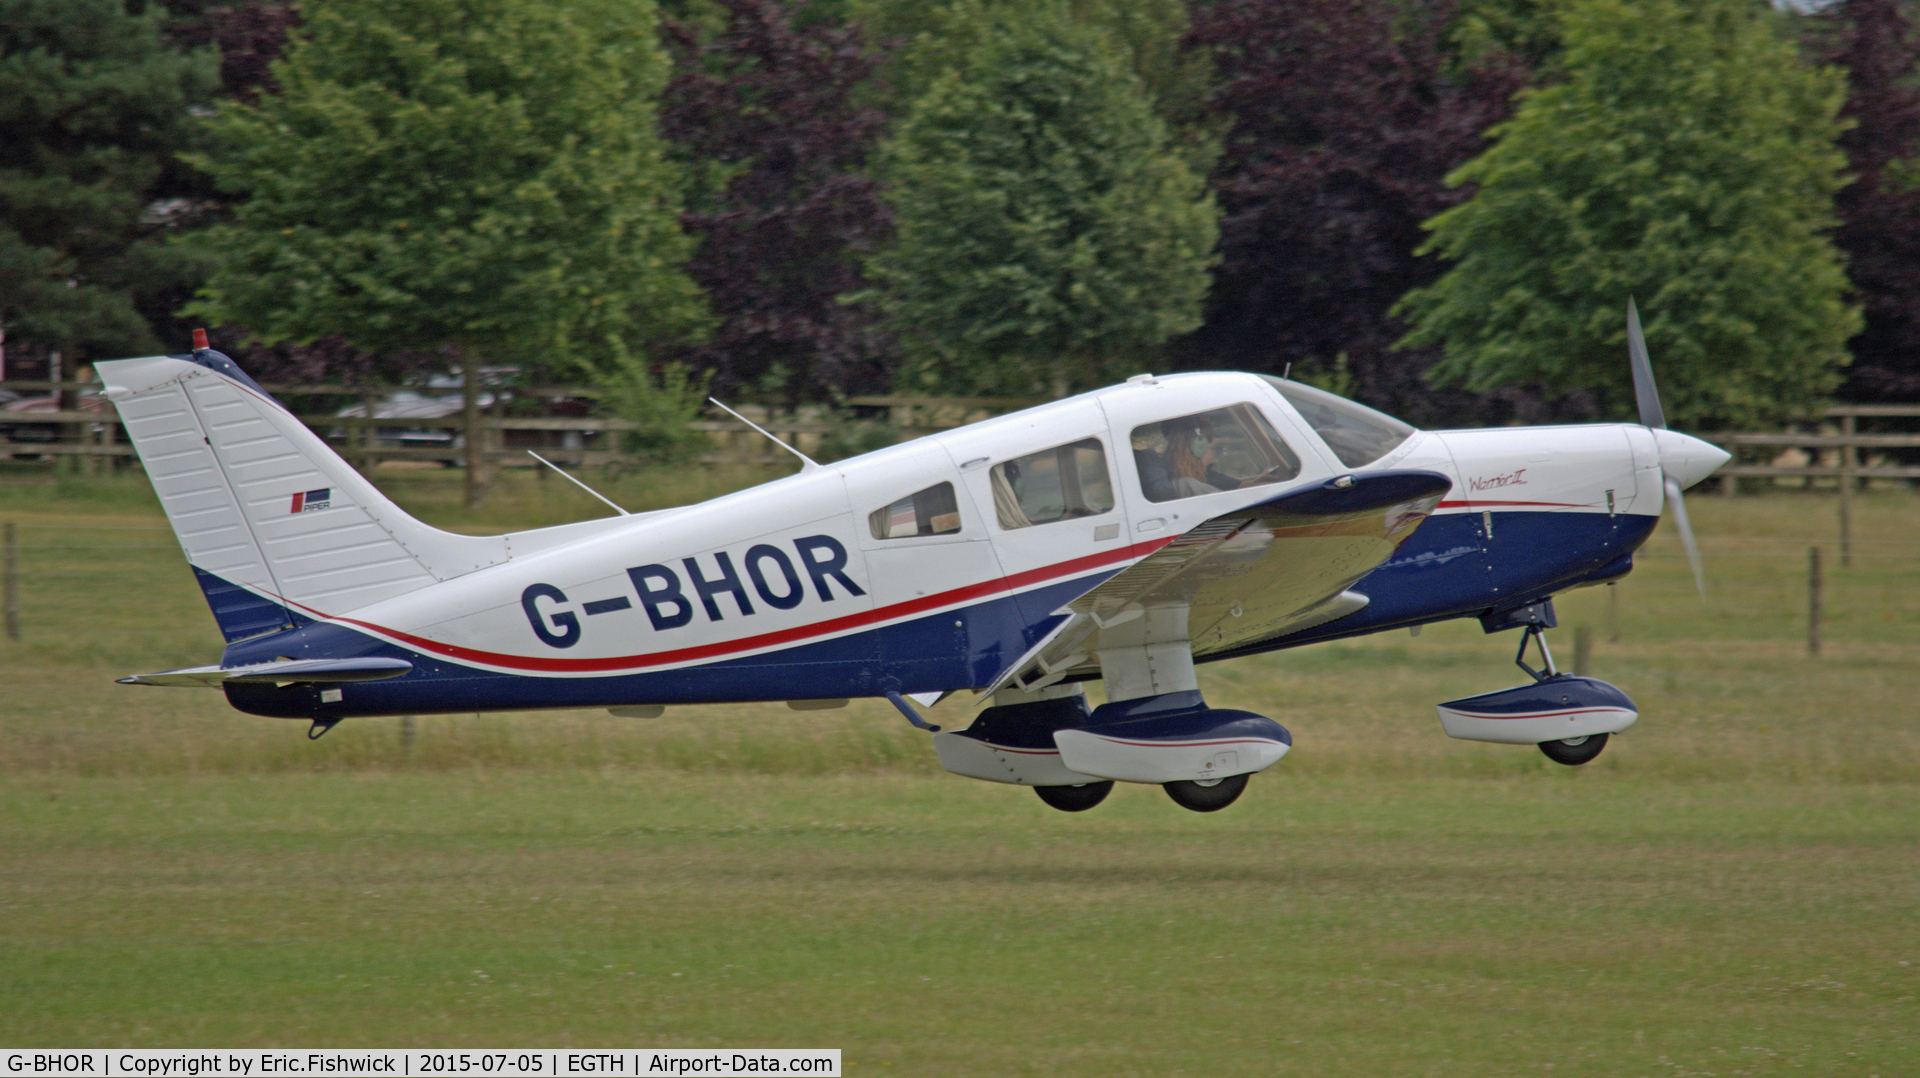 G-BHOR, 1980 Piper PA-28-161 Cherokee Warrior II C/N 28-8016331, 42. G-BHOR departing the Shuttleworth Military Pagent Airshow, July 2015.